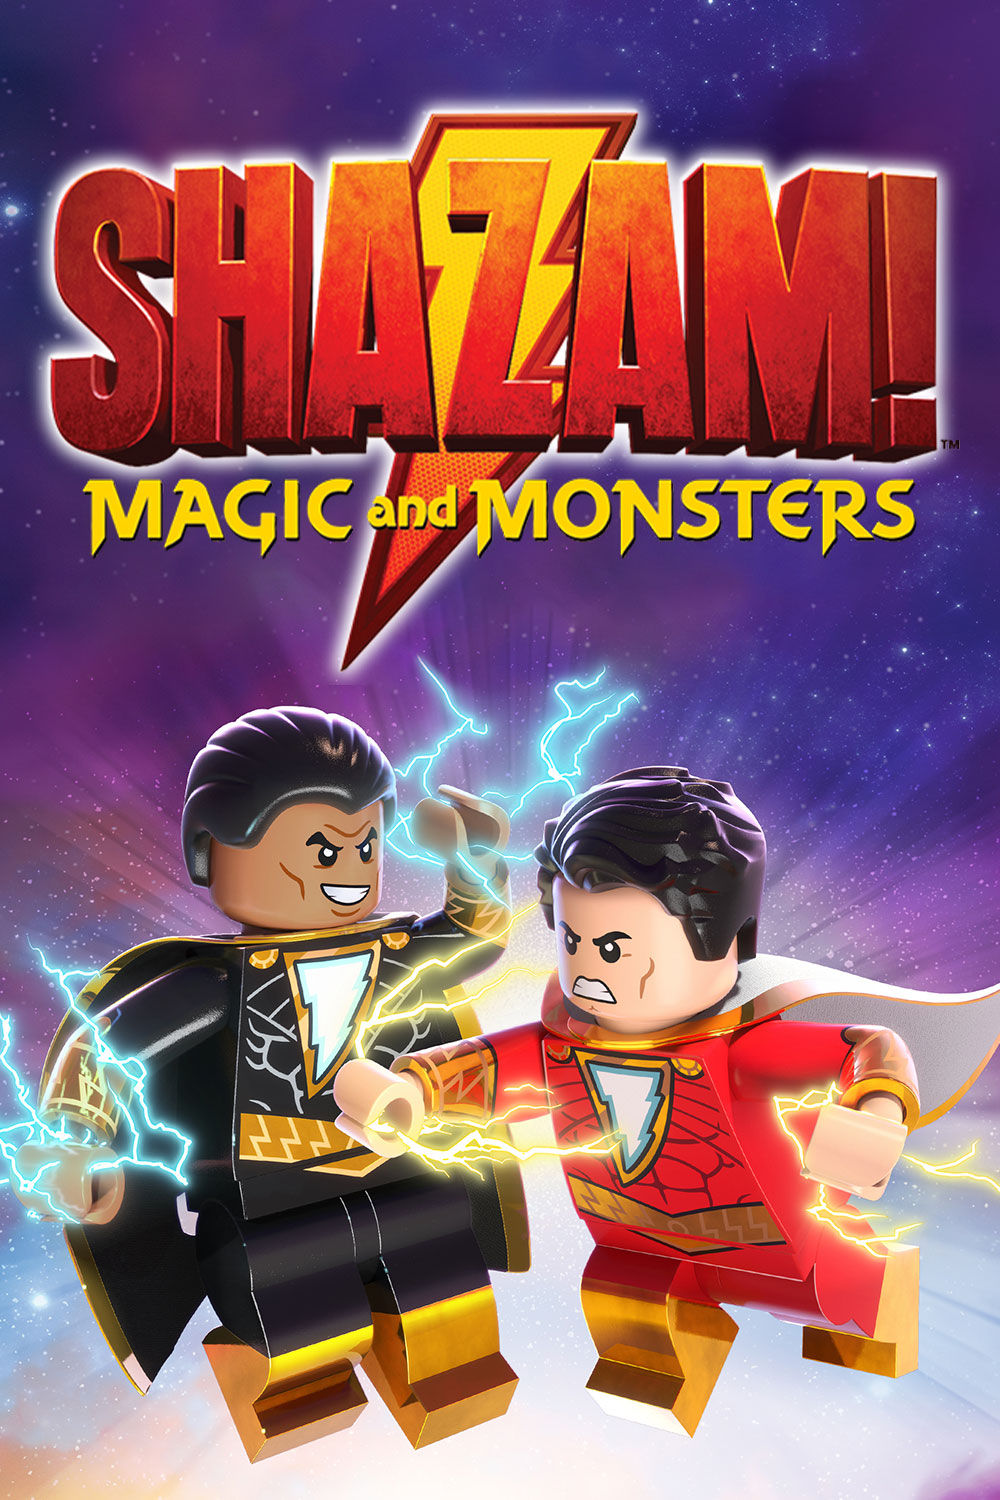 Watch Lego DC: Shazam!: Magic and Monsters Online